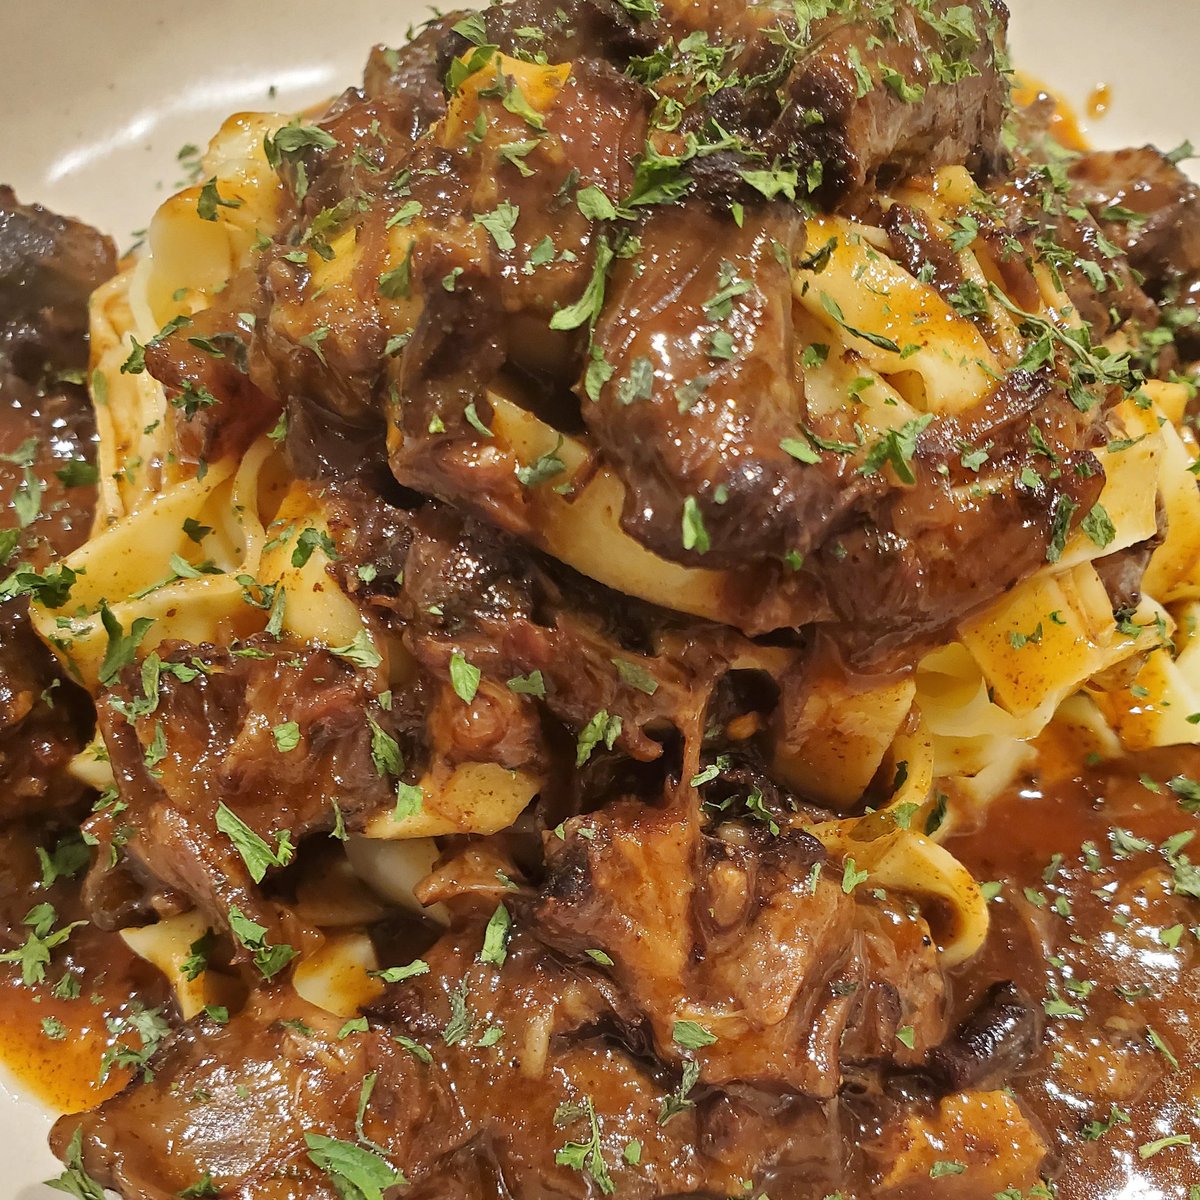 Lunch time.  Oxtail ragu.. get you some.  
#PrivateChef #chefirie #islandflavours #privatedinners #inhomechefservices #miamichef #floridachef #globalcuisine #oxtail #oxtailragu